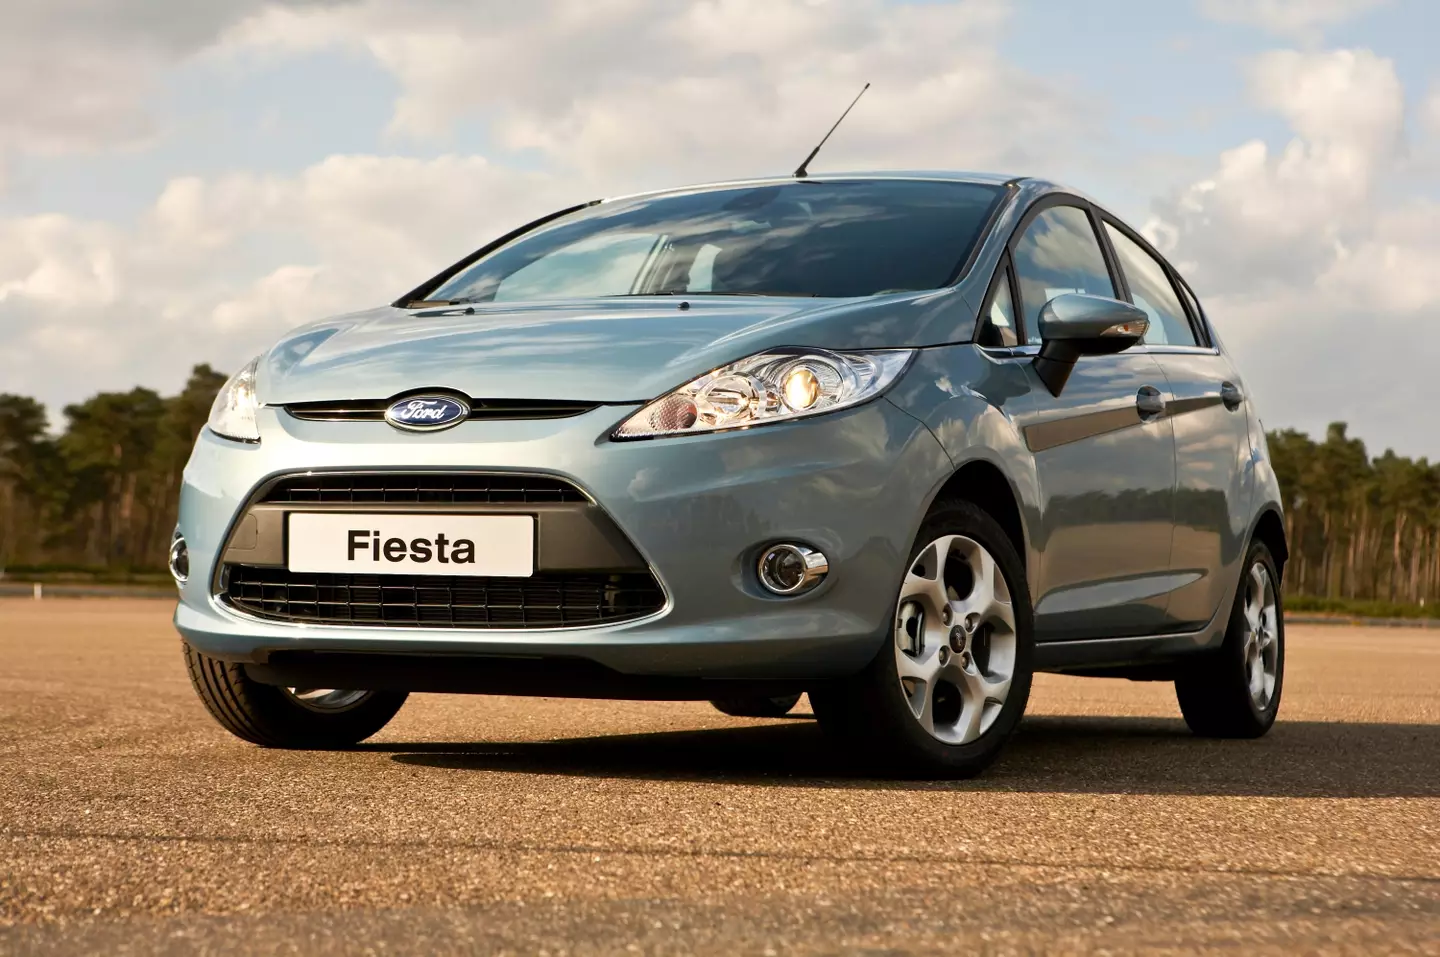 Ford has sold a whopping 4.8 million Fiestas over a period of 46 years.